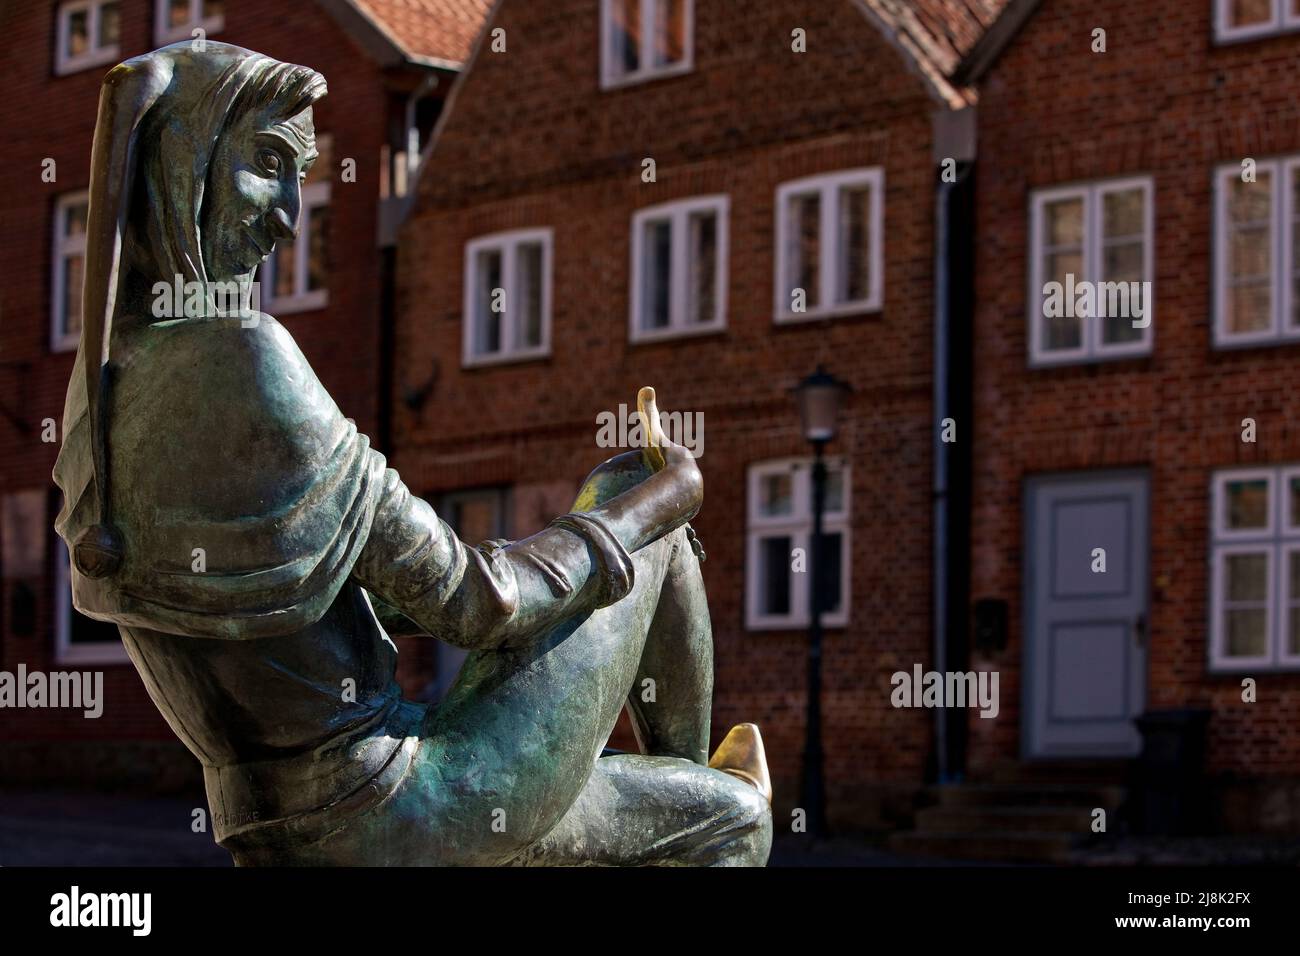 Sculpture Till Eulenspiegel on the fountain in the old town of Moelln, Germany, Schleswig-Holstein, Moelln Stock Photo